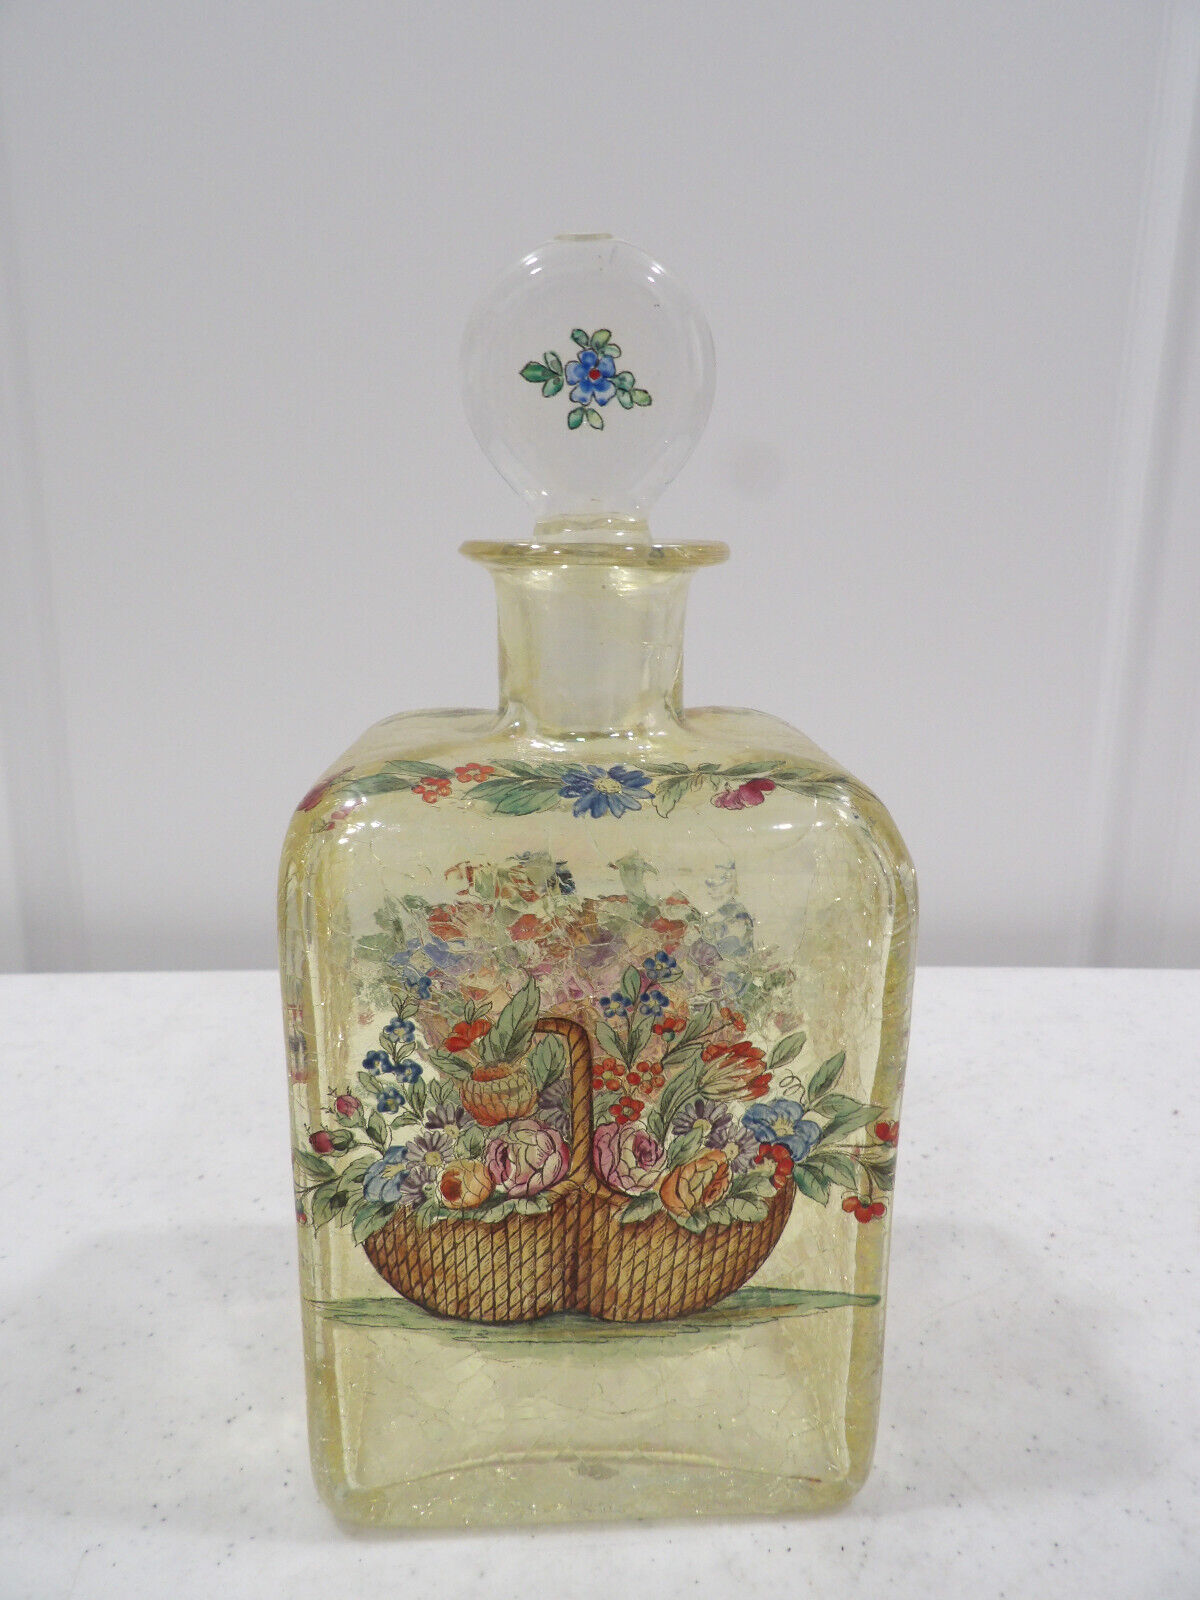 Fabulous Old VINTAGE CZECH Crackle Glass Perfume Decanter~Flower Baskets~Signed